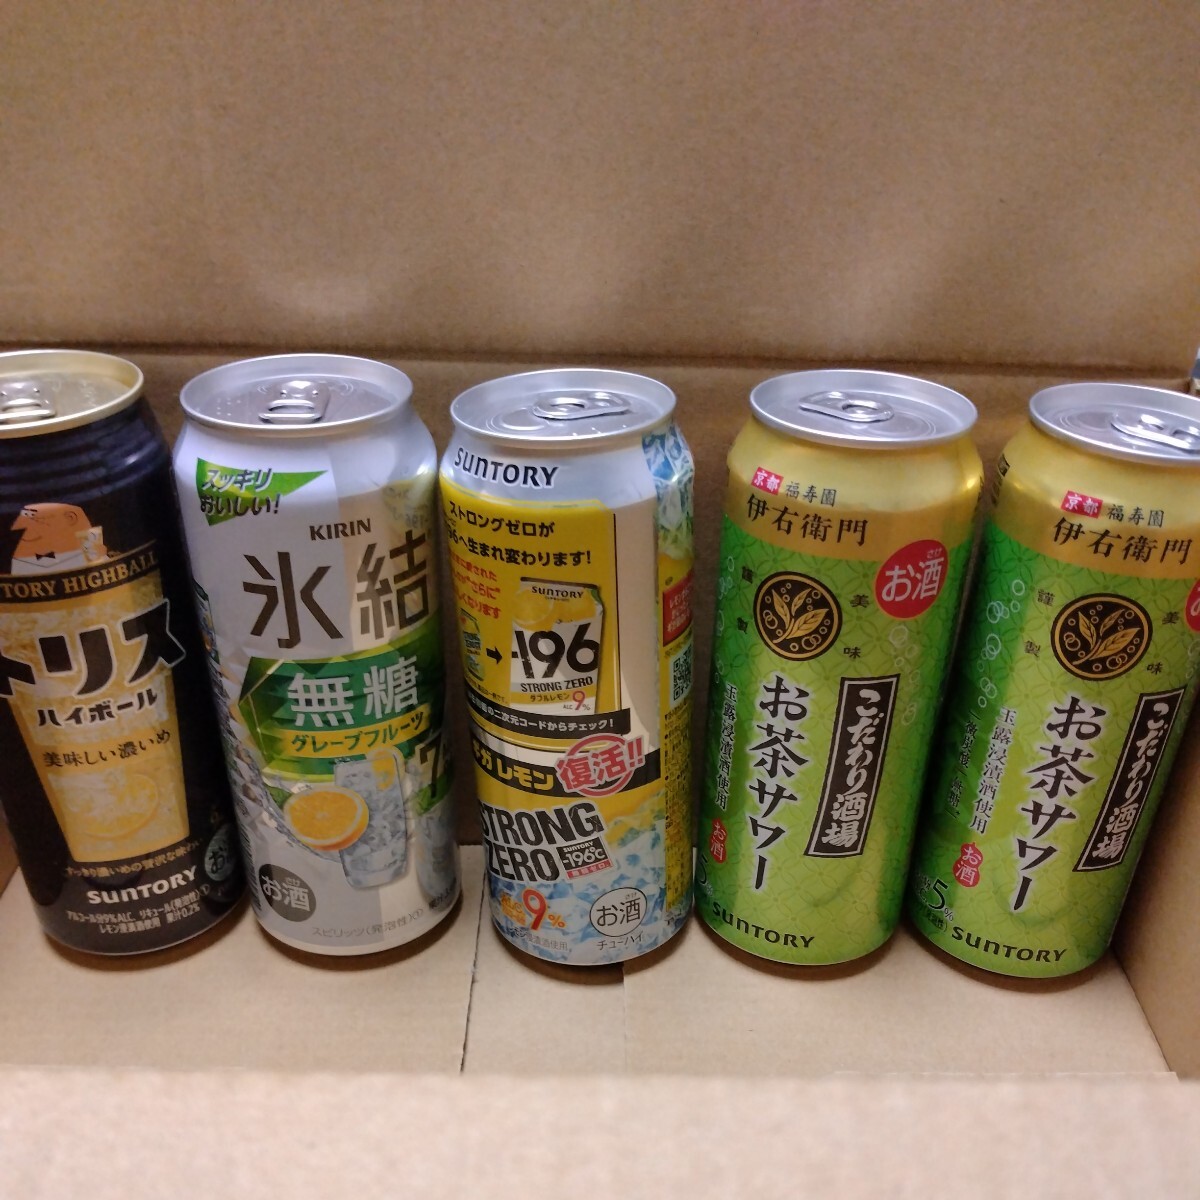  sake various 16ps.@ freebie attaching can beer highball high sour chuhai non aru time limit this month .4 pieces equipped to squirrel Suntory giraffe Sapporo Asahi 